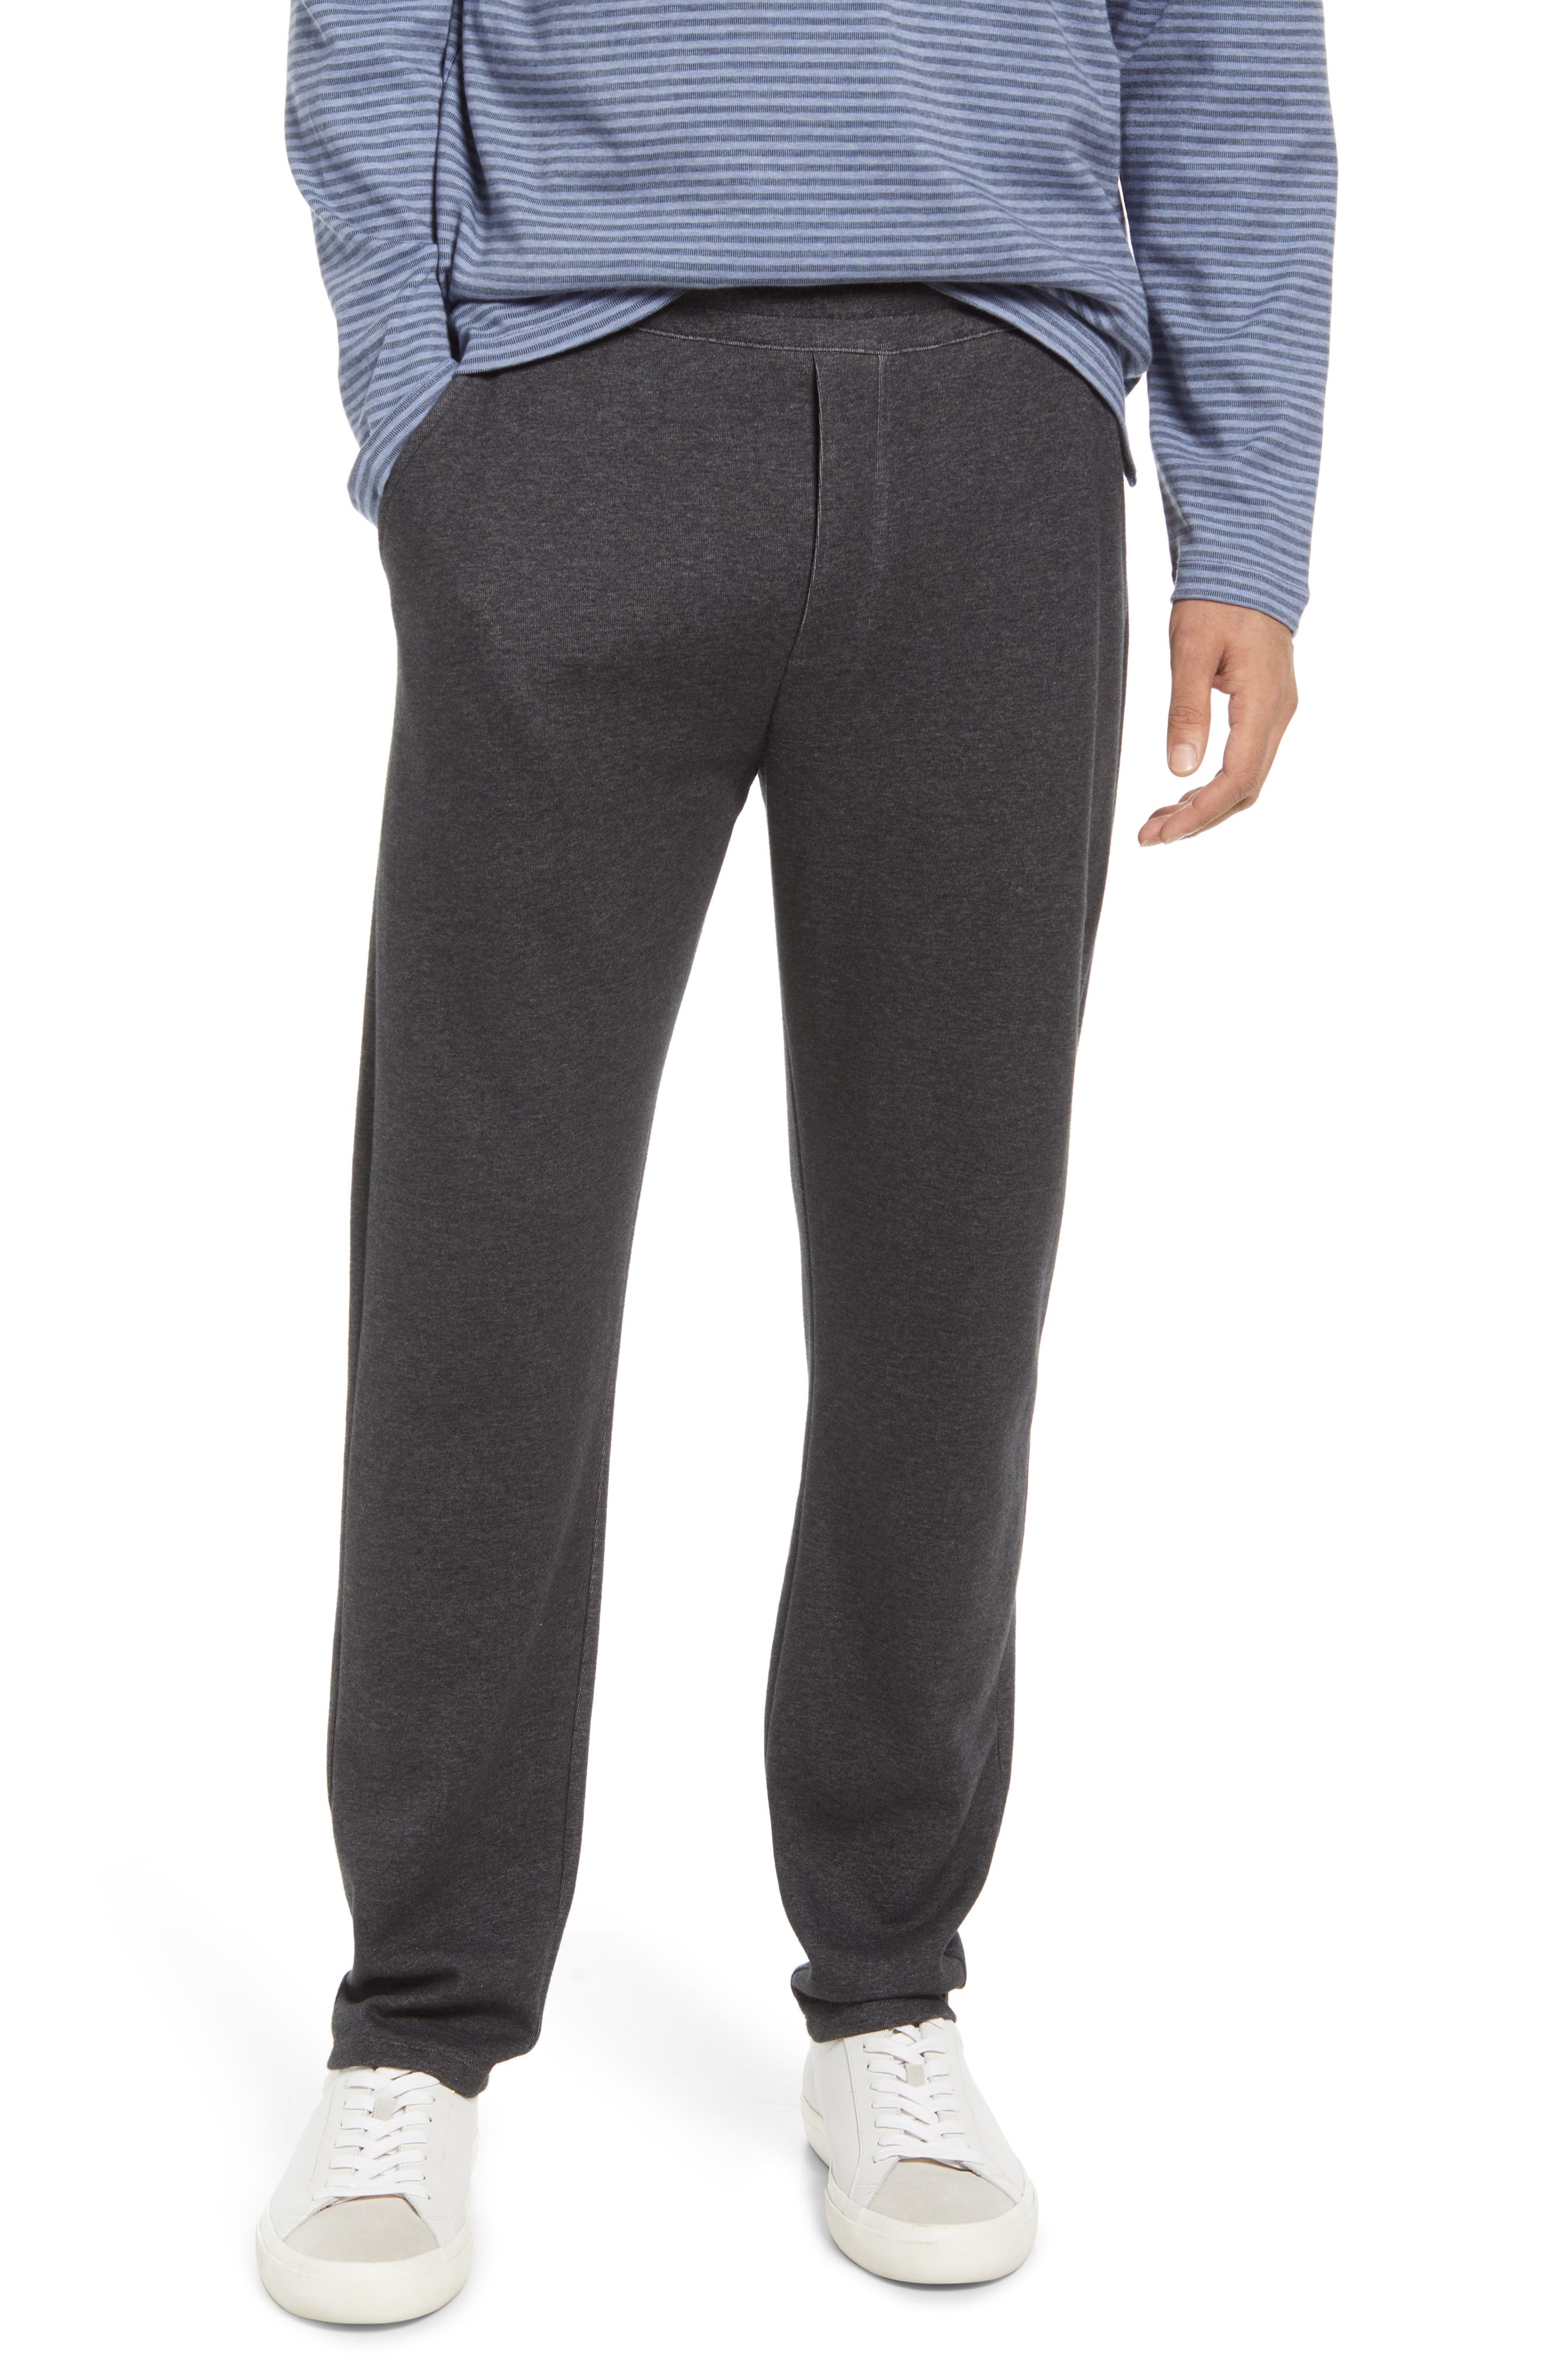 Vince Cozy Joggers in H Black at Nordstrom